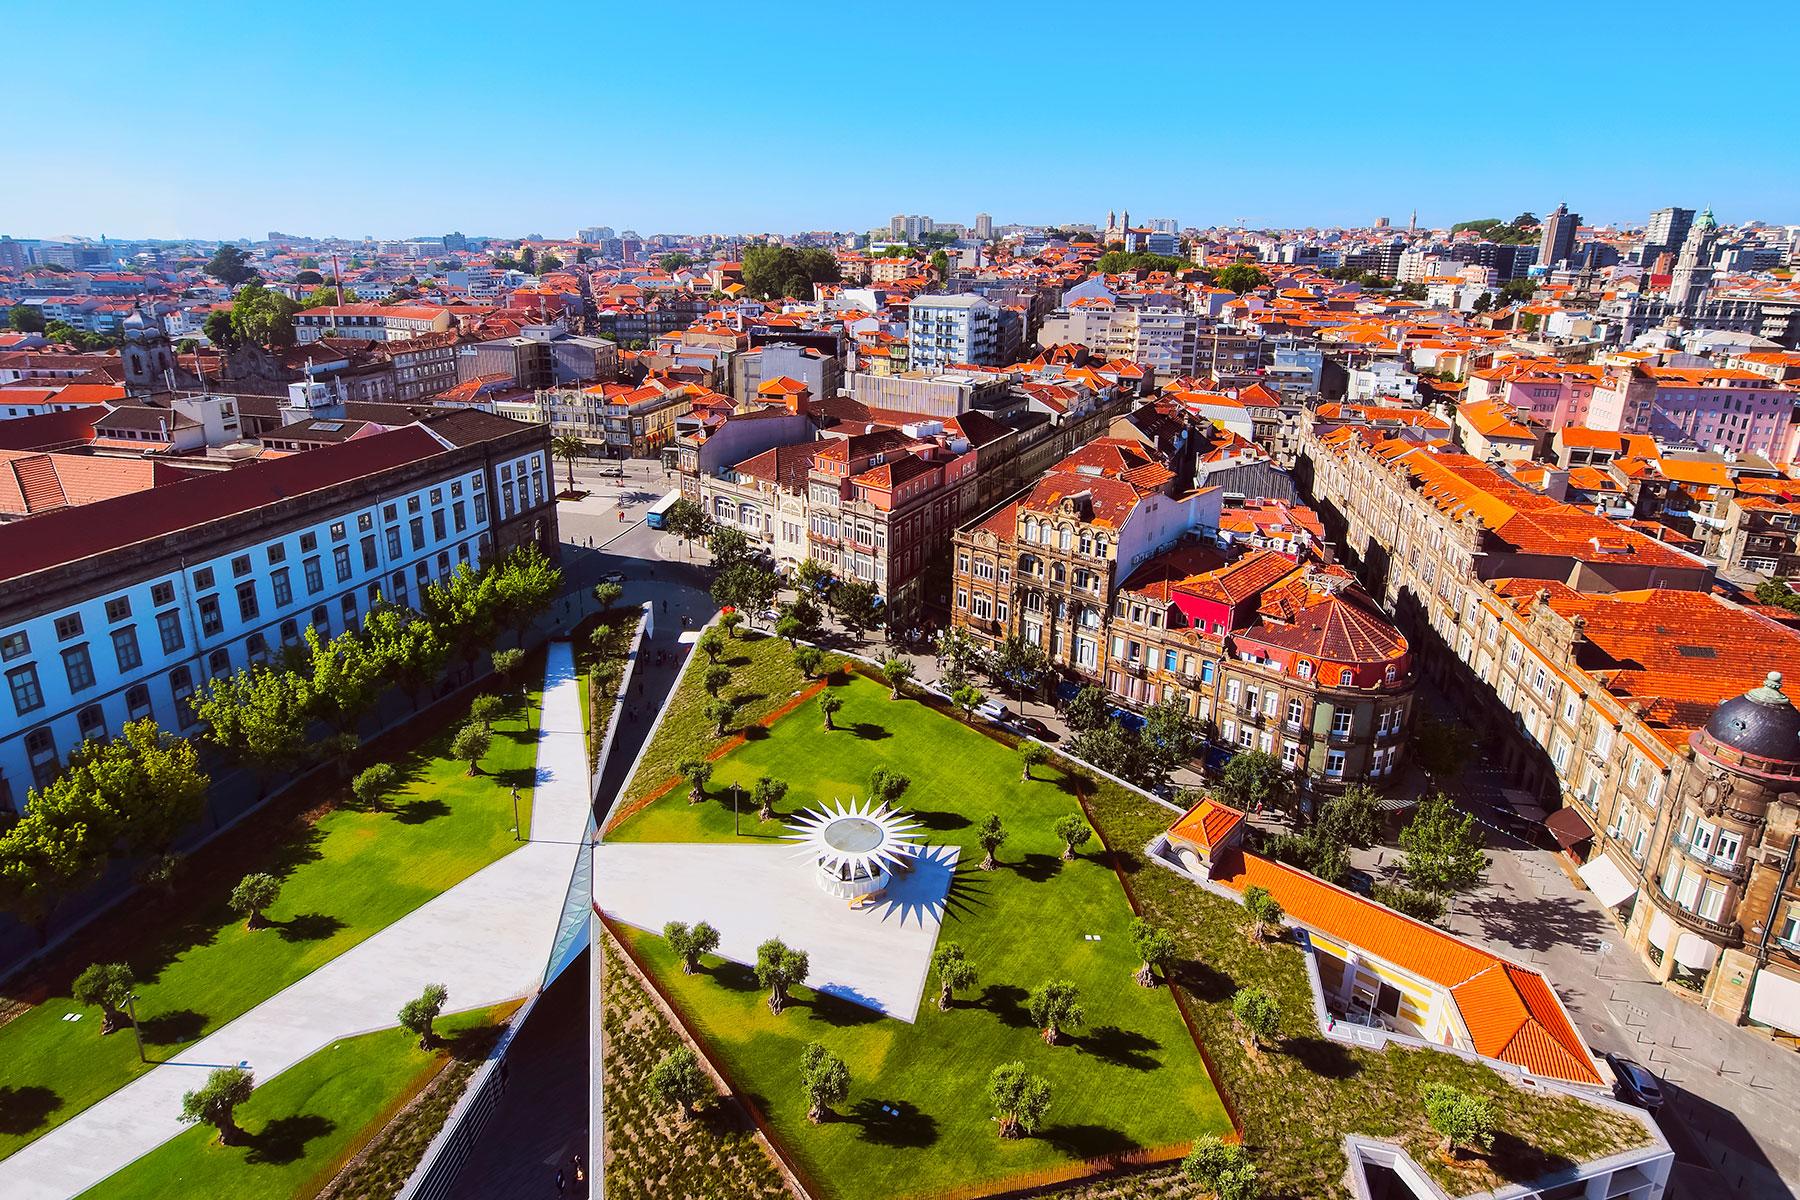 10 Things To Do In Porto (Besides Drink Port) – Fodors Travel Guide